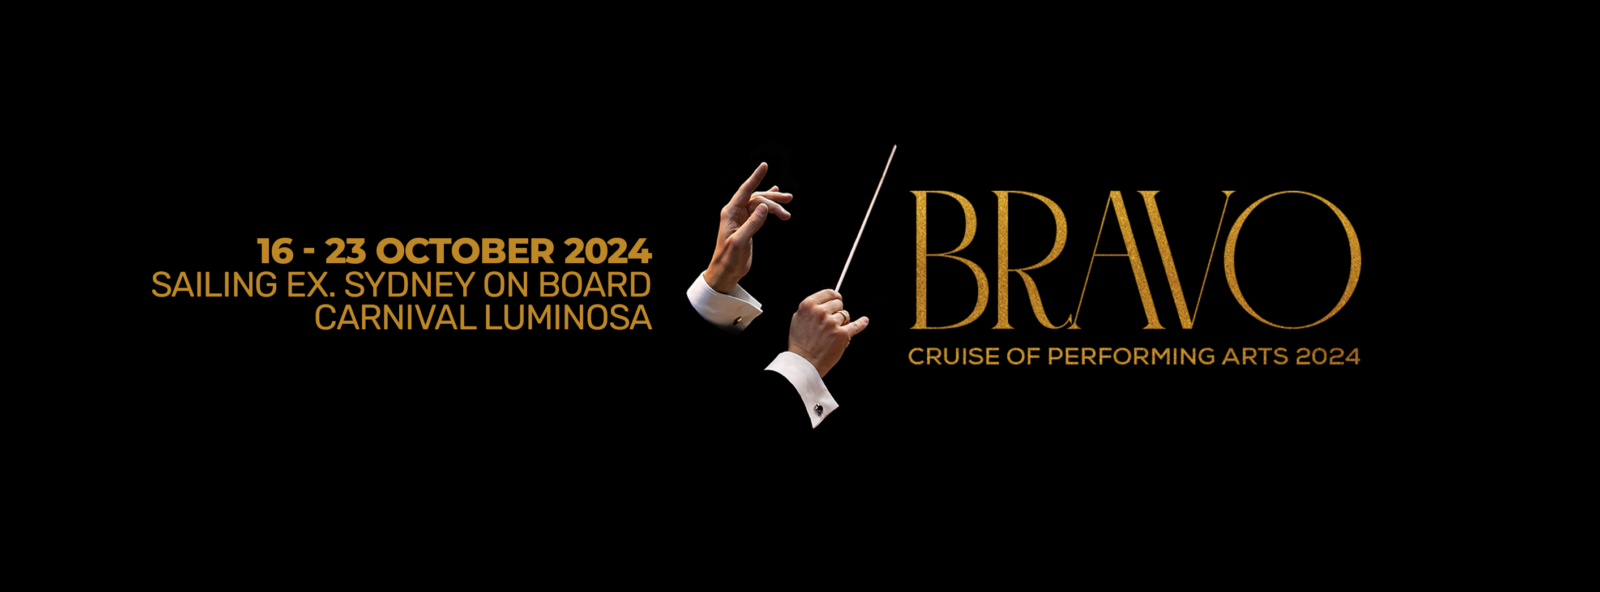 Bravo Cruise of the Performing Arts